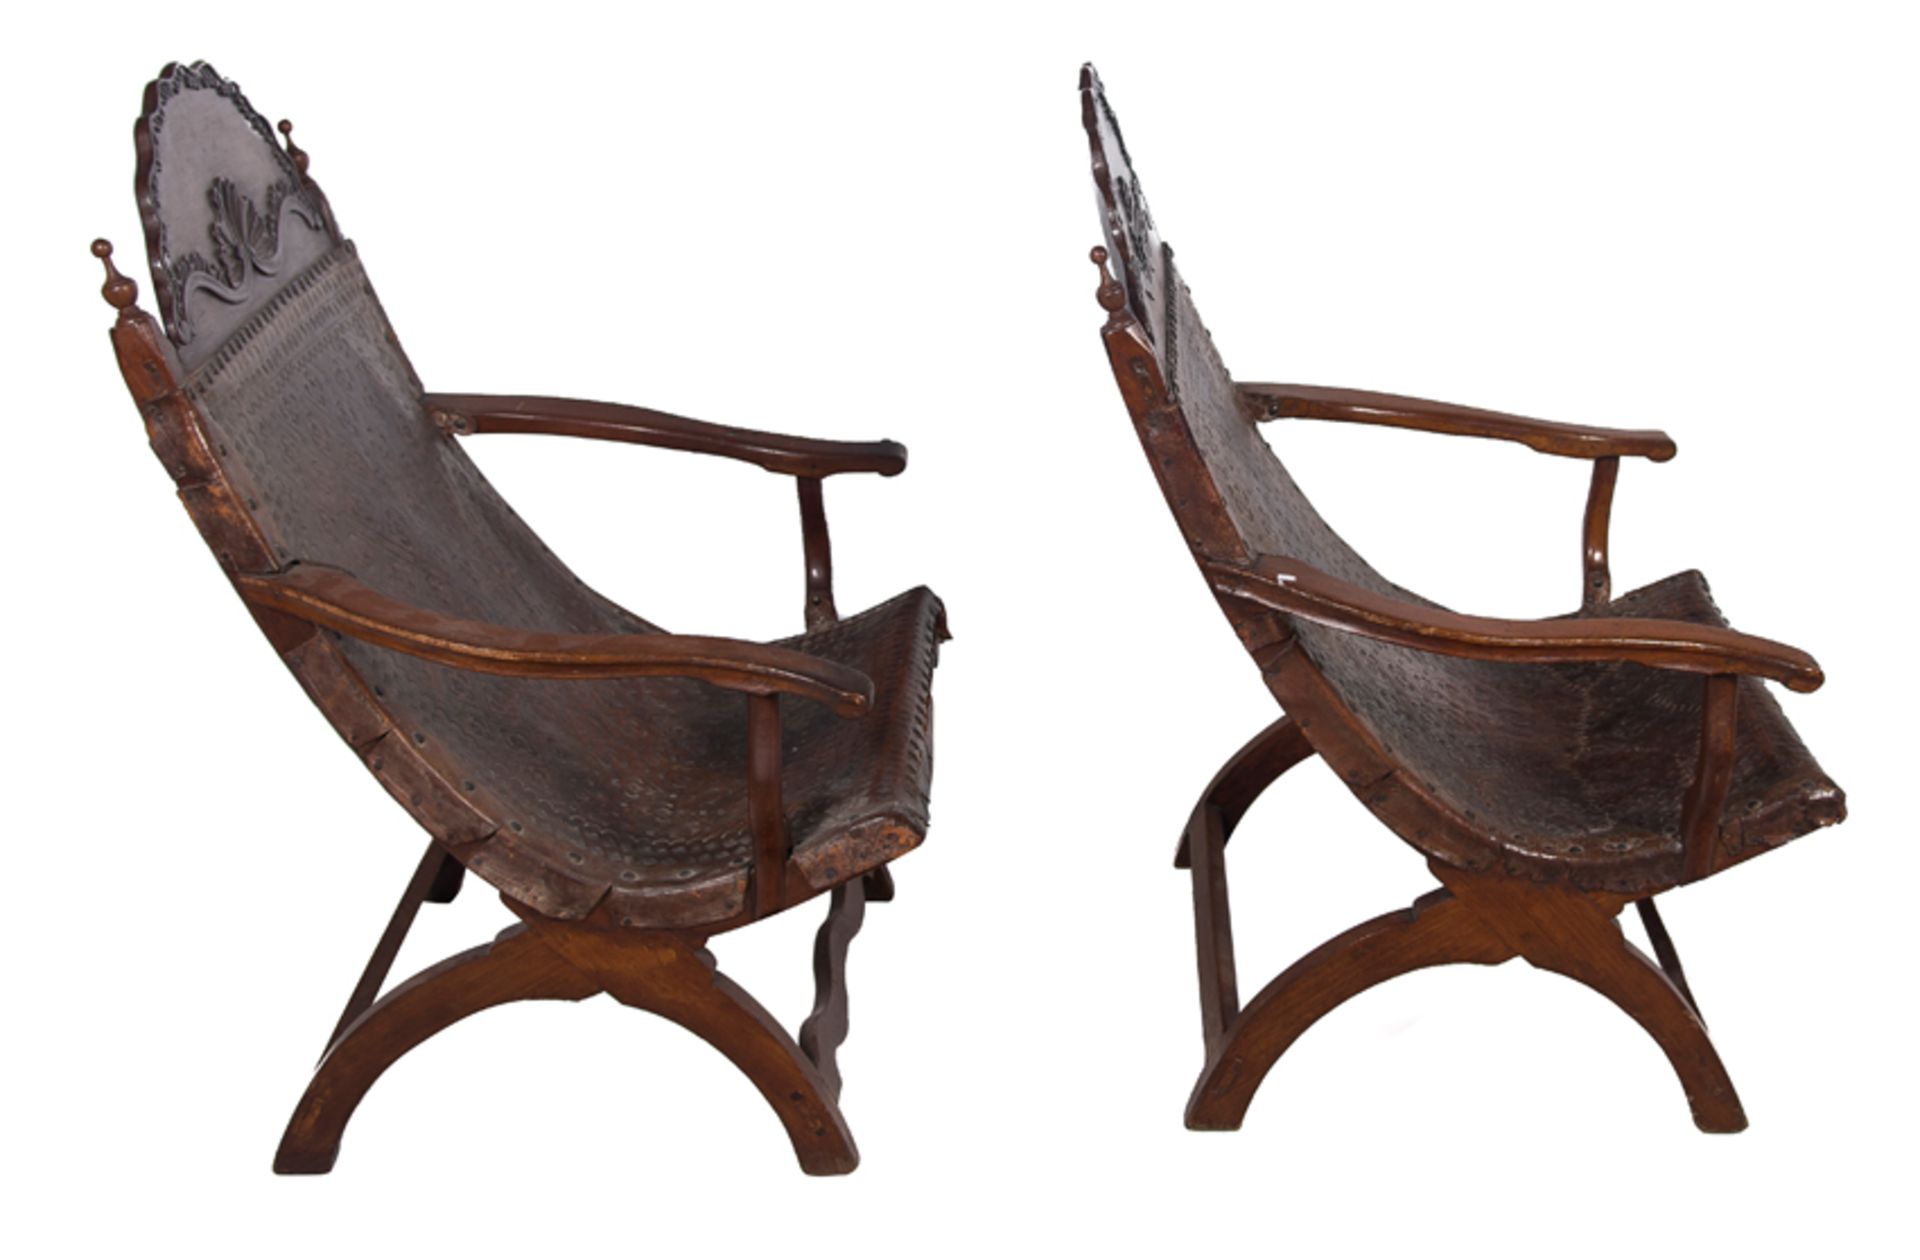 Pair of "Campeche" chairs. Made of cedar wood and leather. Mexico. Late 18th century. - Image 4 of 7